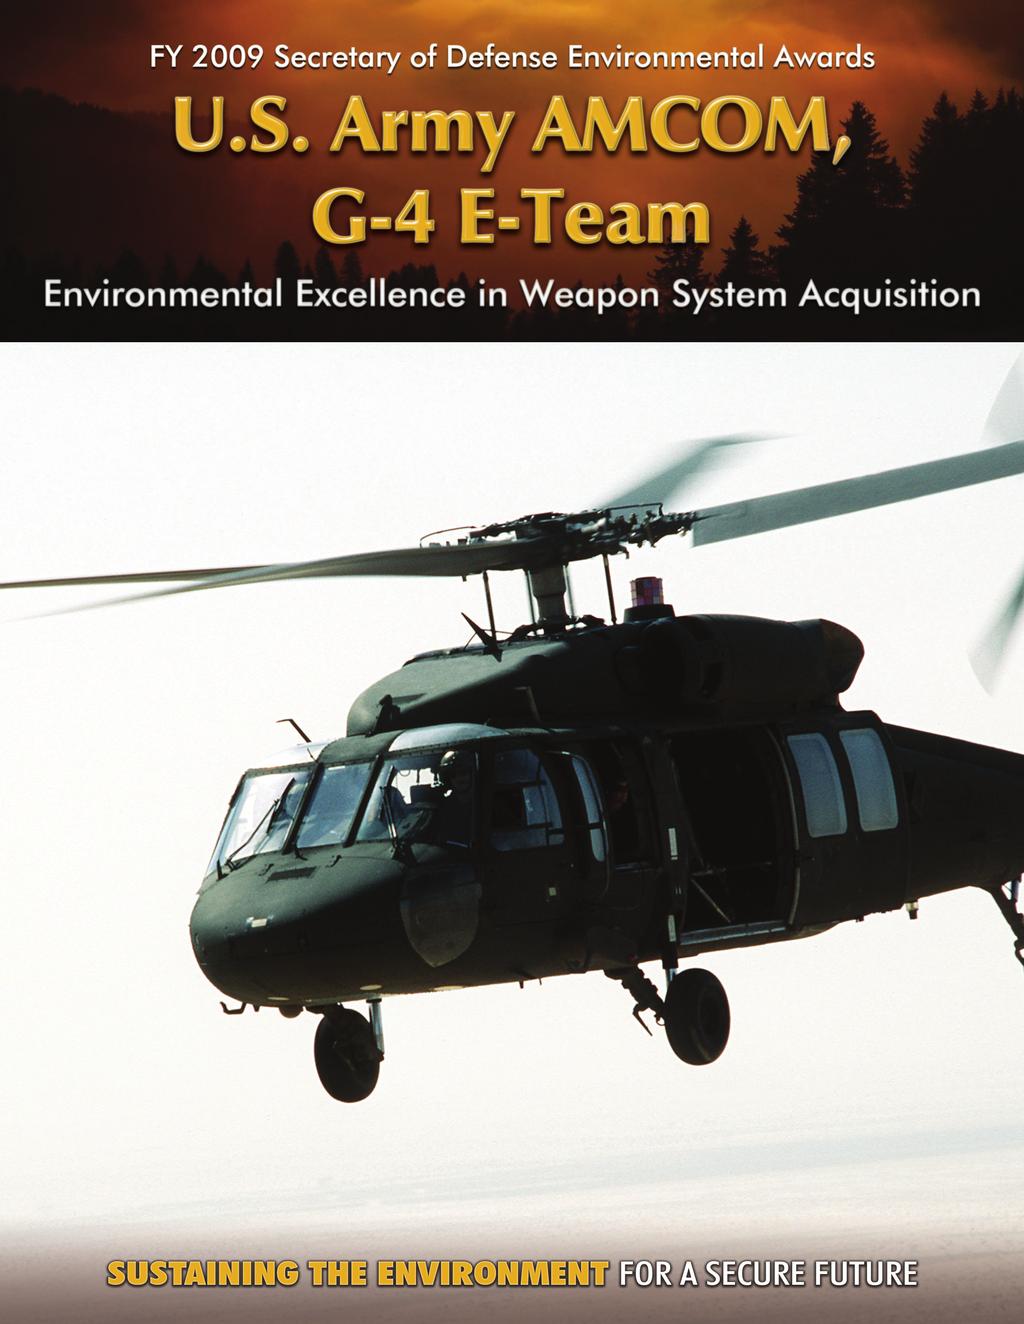 U.S. Army Nomination Secretary of Defense Environmental Awards INTRODUCTION From FY 2008 2009, the U.S. Army Aviation and Missile Command (AMCOM) G-4 Environmental Team (G-4 E-Team) excelled in